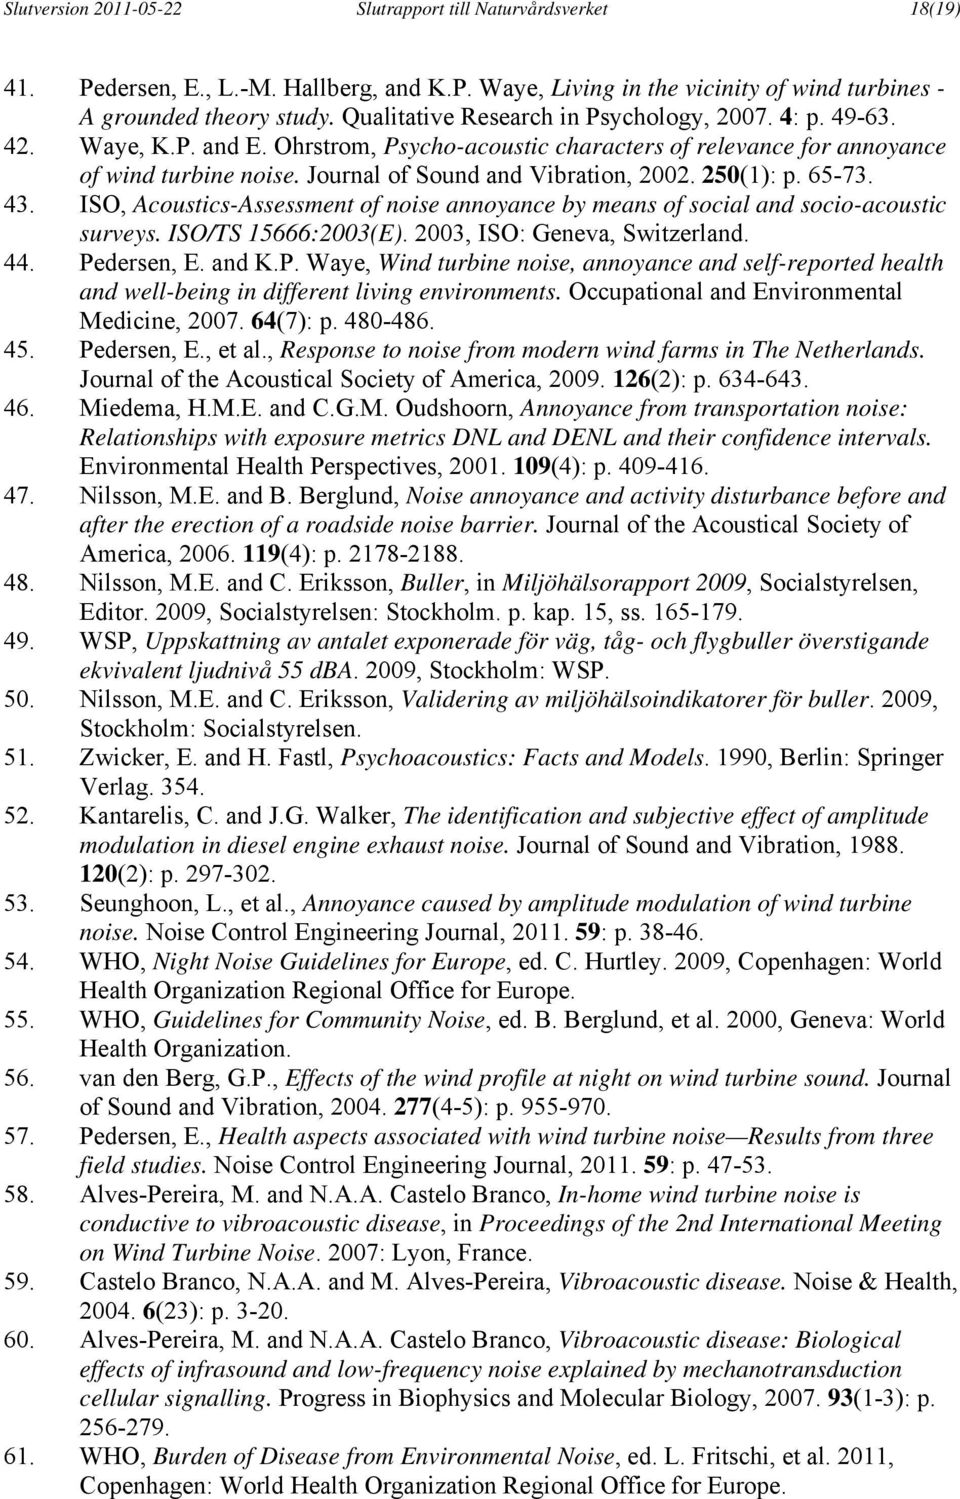 Journal of Sound and Vibration, 2002. 250(1): p. 65-73. 43. ISO, Acoustics-Assessment of noise annoyance by means of social and socio-acoustic surveys. ISO/TS 15666:2003(E).